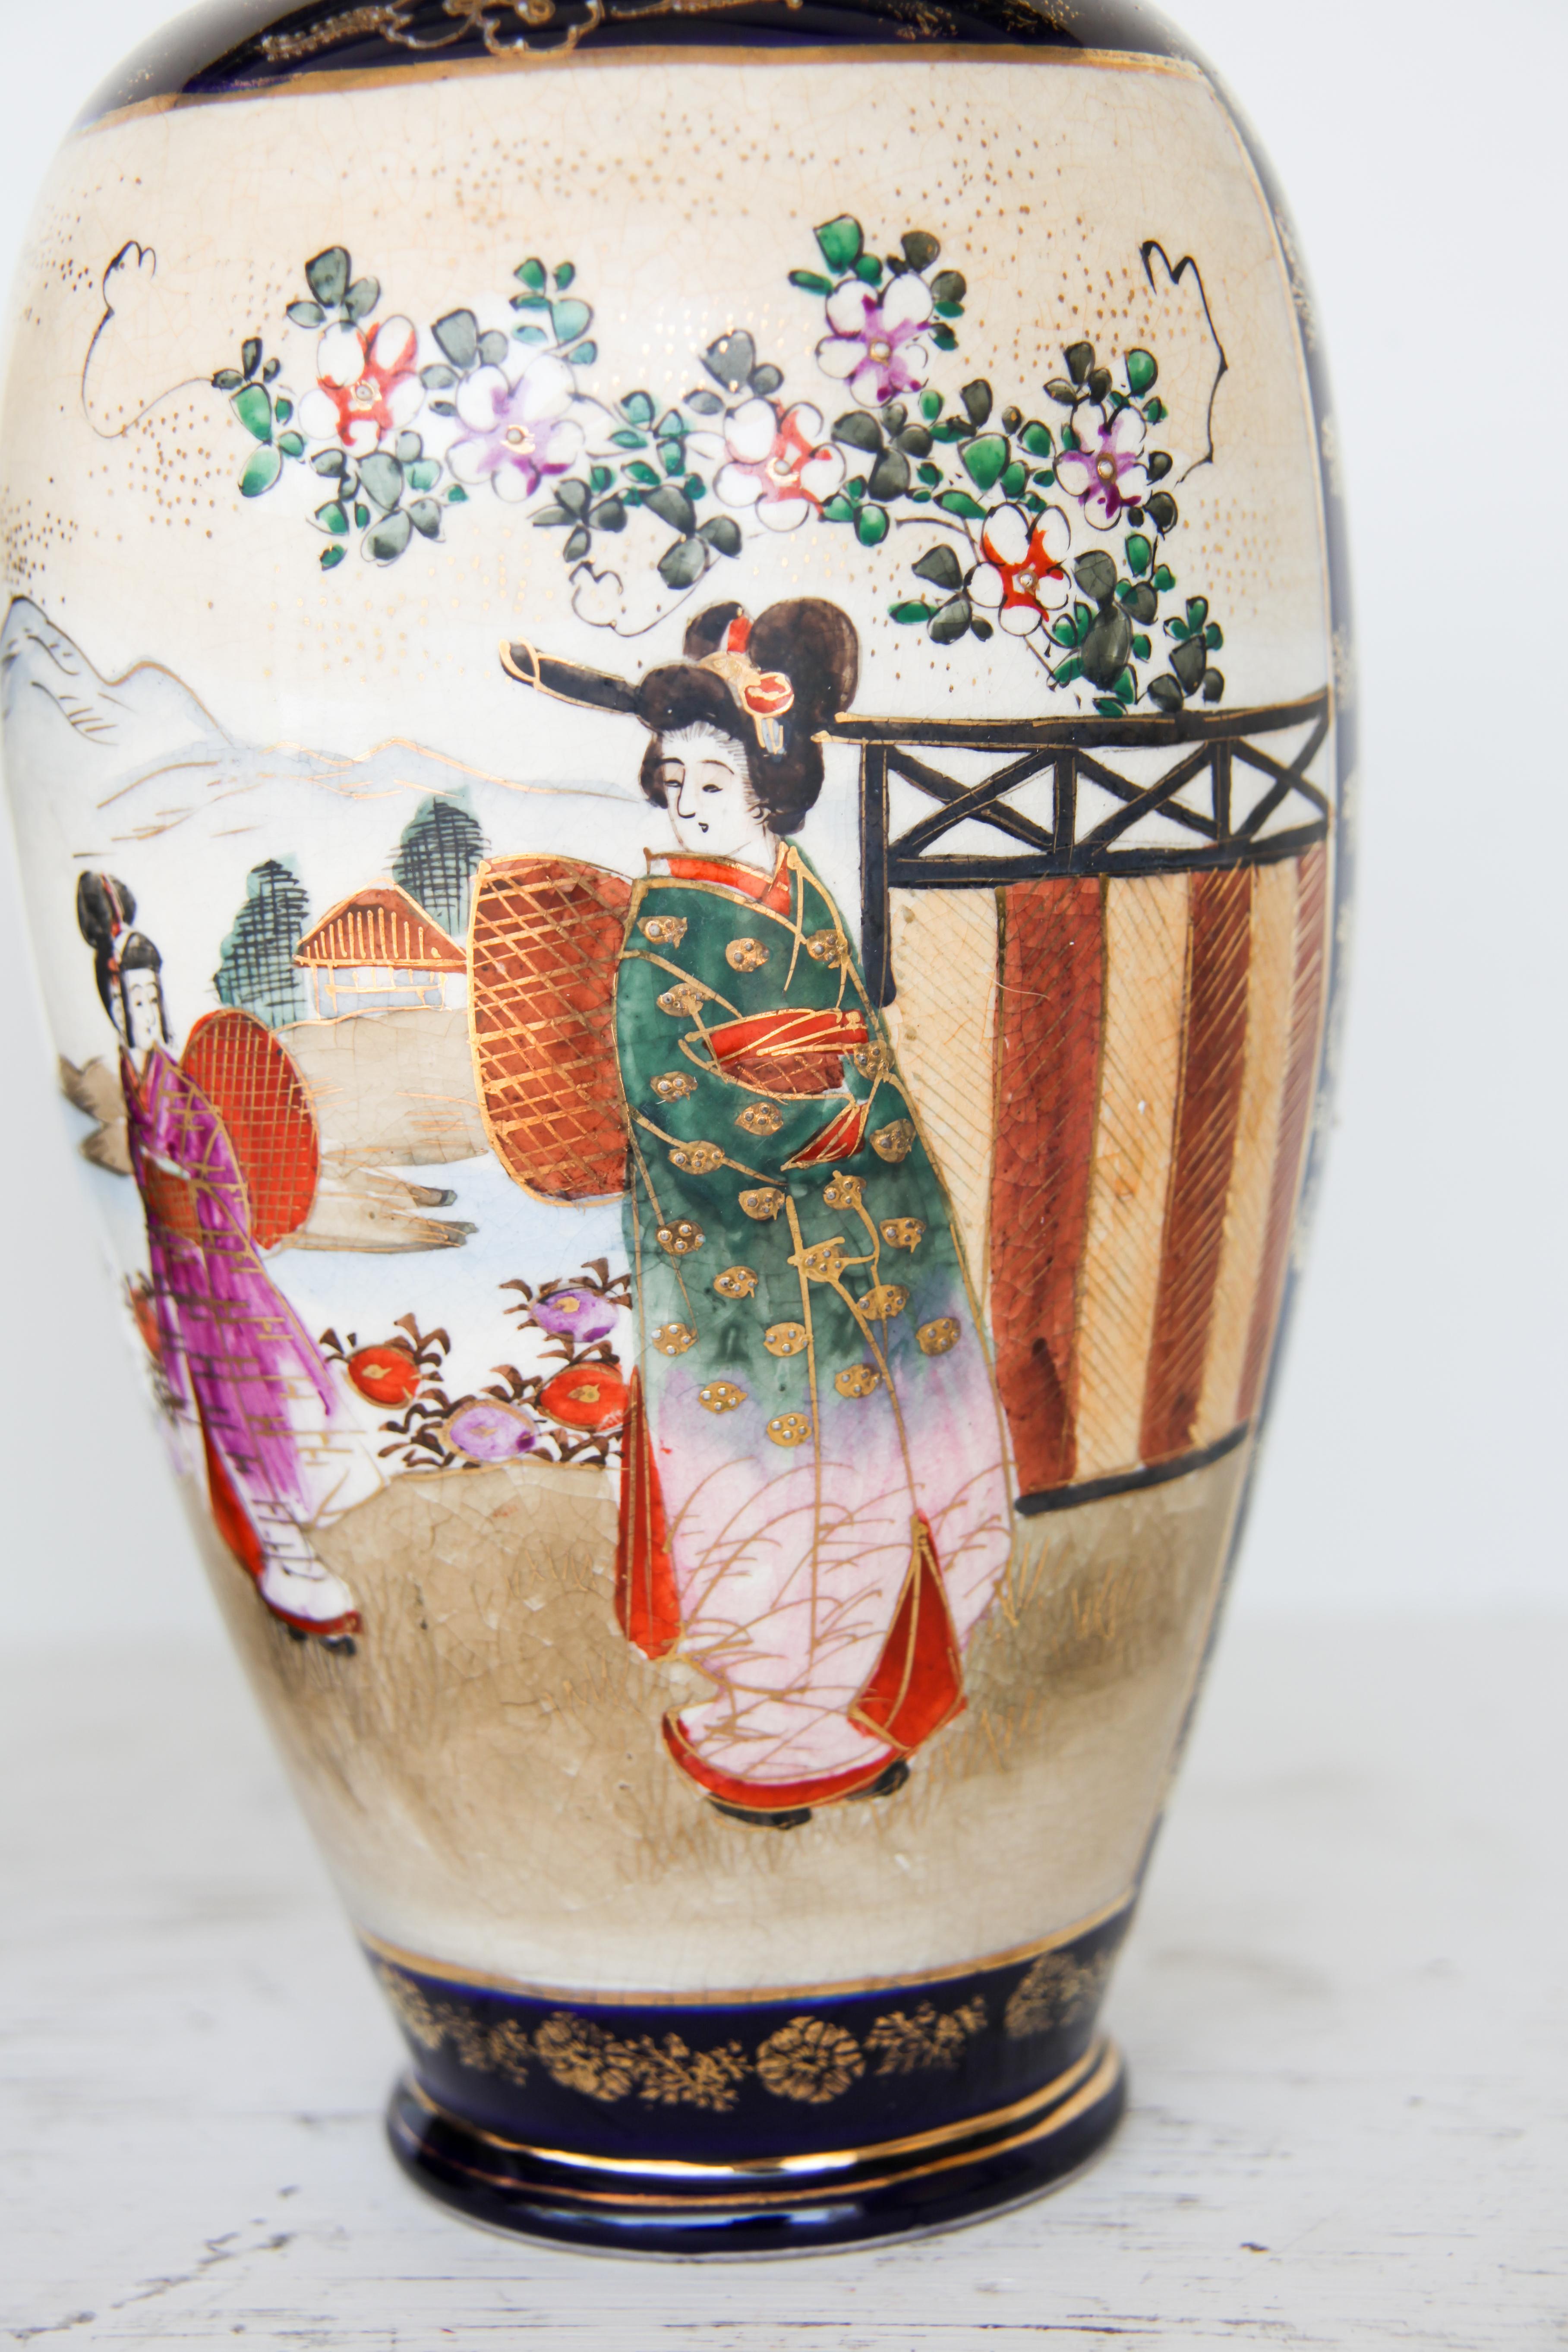 Pair of Japanese Satsuma Vases, with two scenes on each vase depicting Japanese women and children in landscape settings with mountains in the background. The vases have a cobalt ground color with gilt decoration